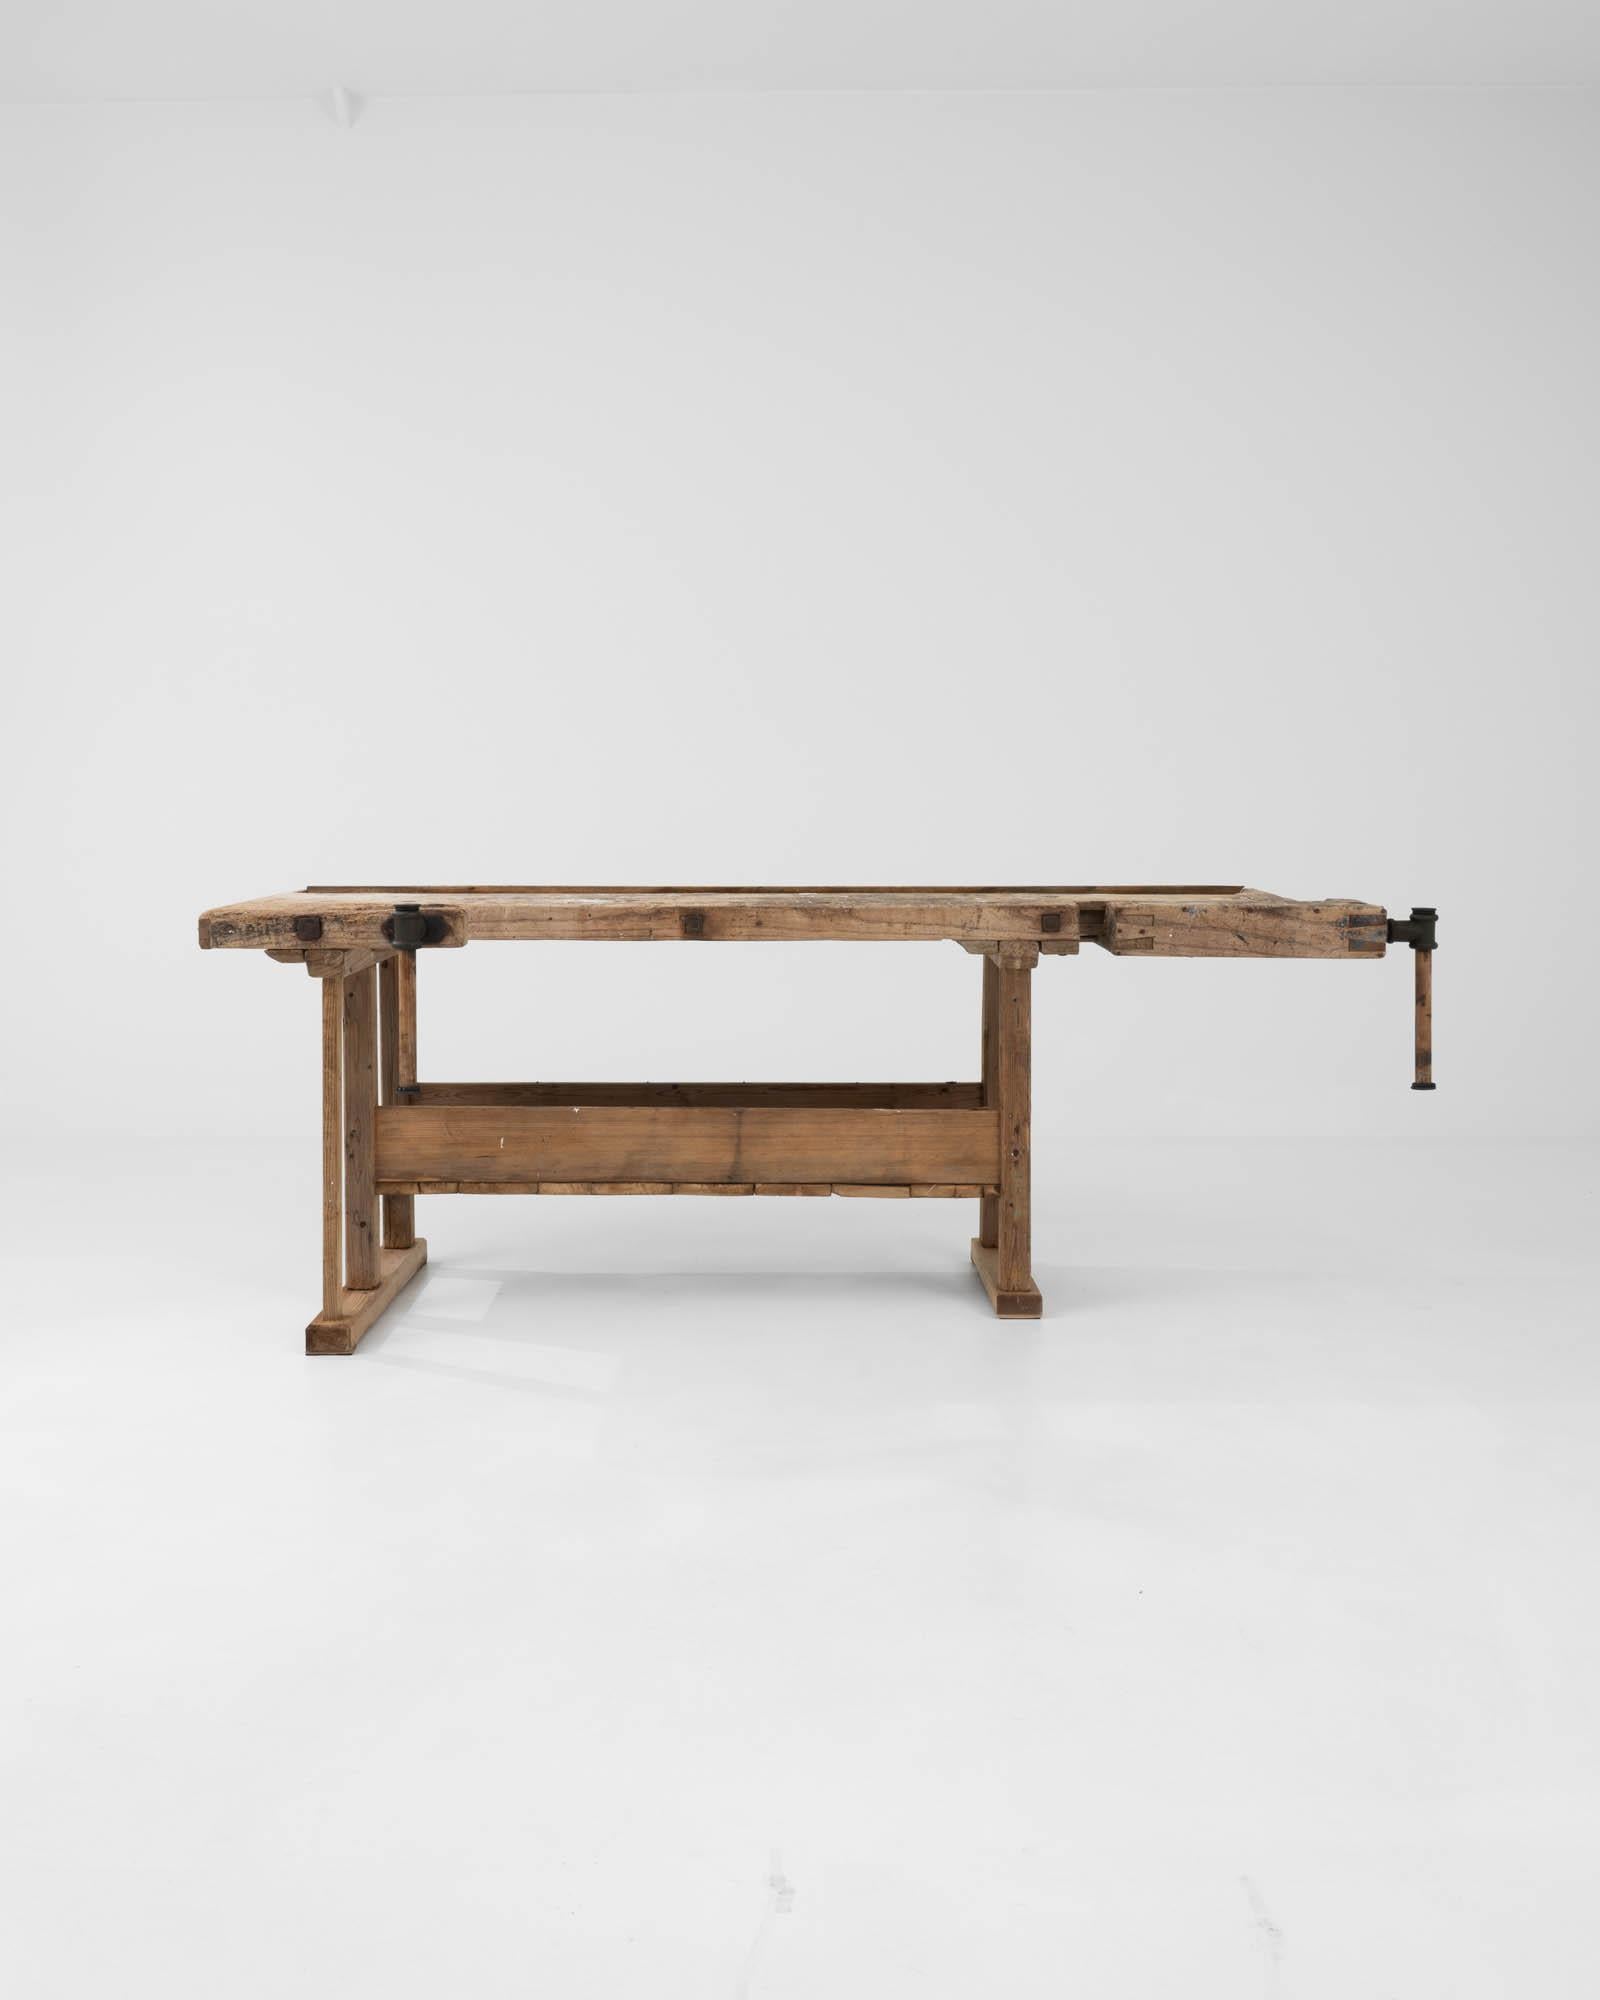 A vintage Czech wooden work table. Constructed from stout wooden beams, crafted with the owner’s livelihood in mind. This ultimate sturdy table’s newest craft is turning function into style. Worn and loved, the details in its construction: thick